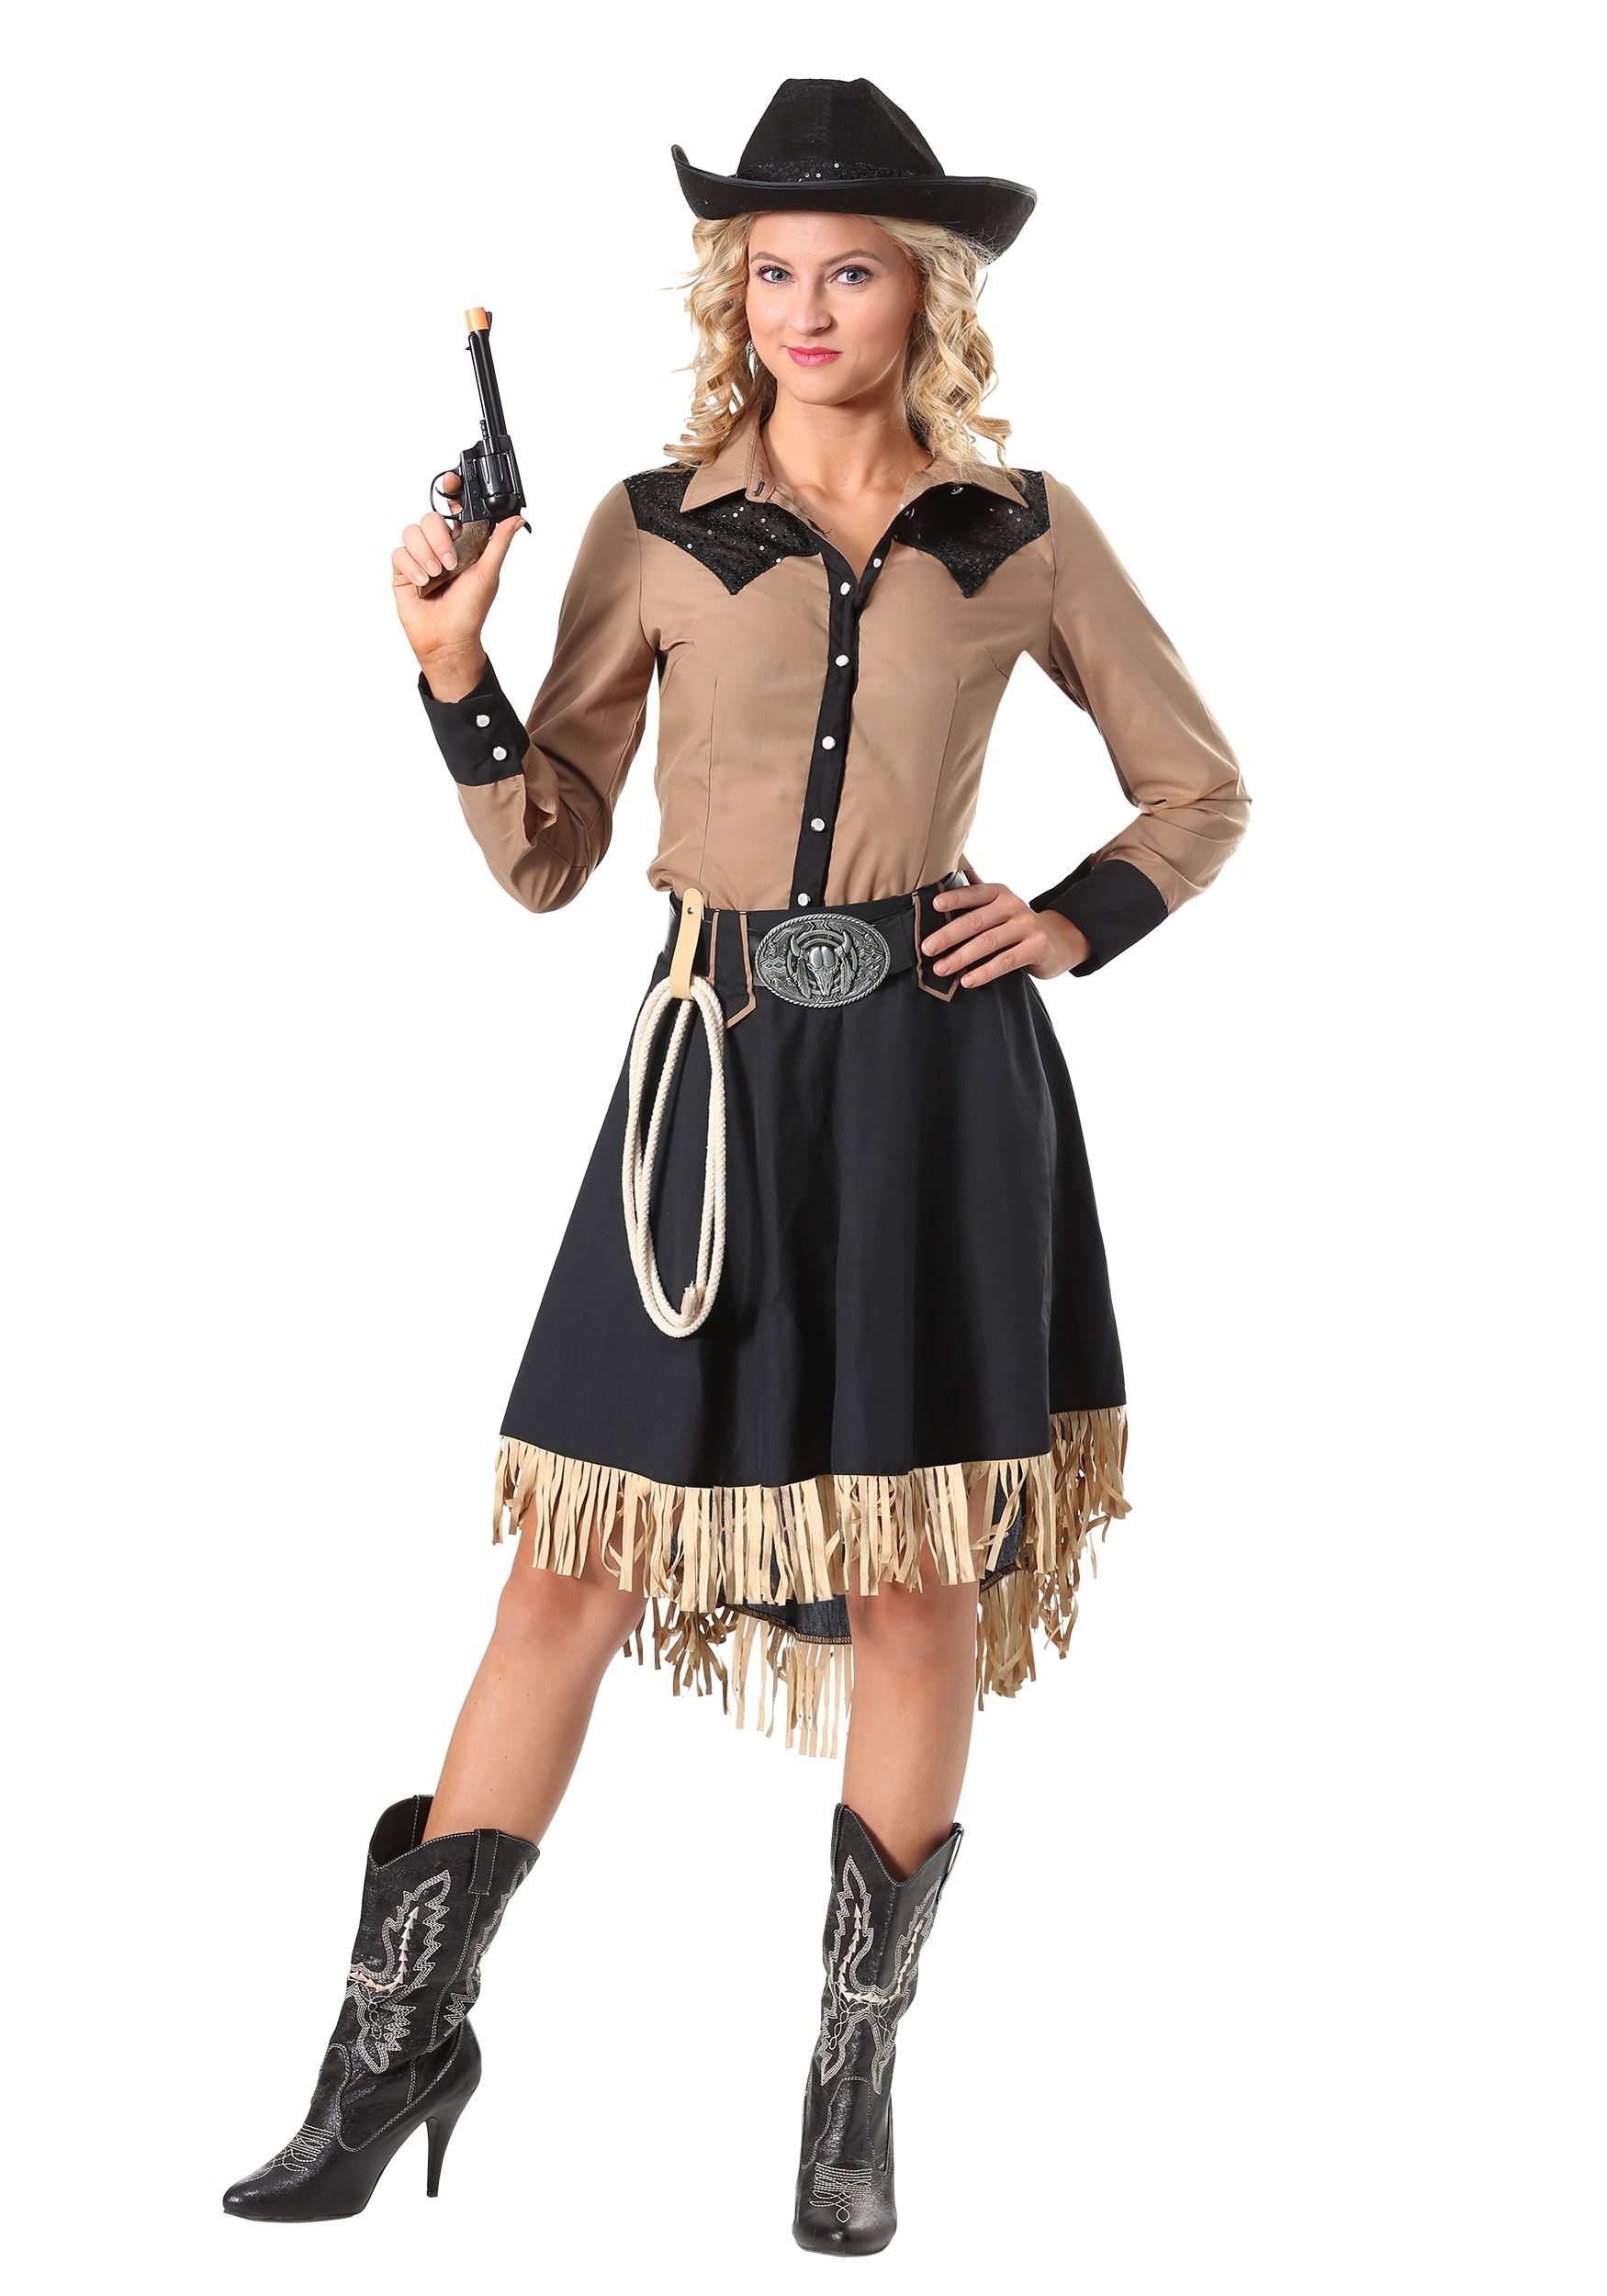 Lasso'n Cowgirl Costume for Women, Western Costume